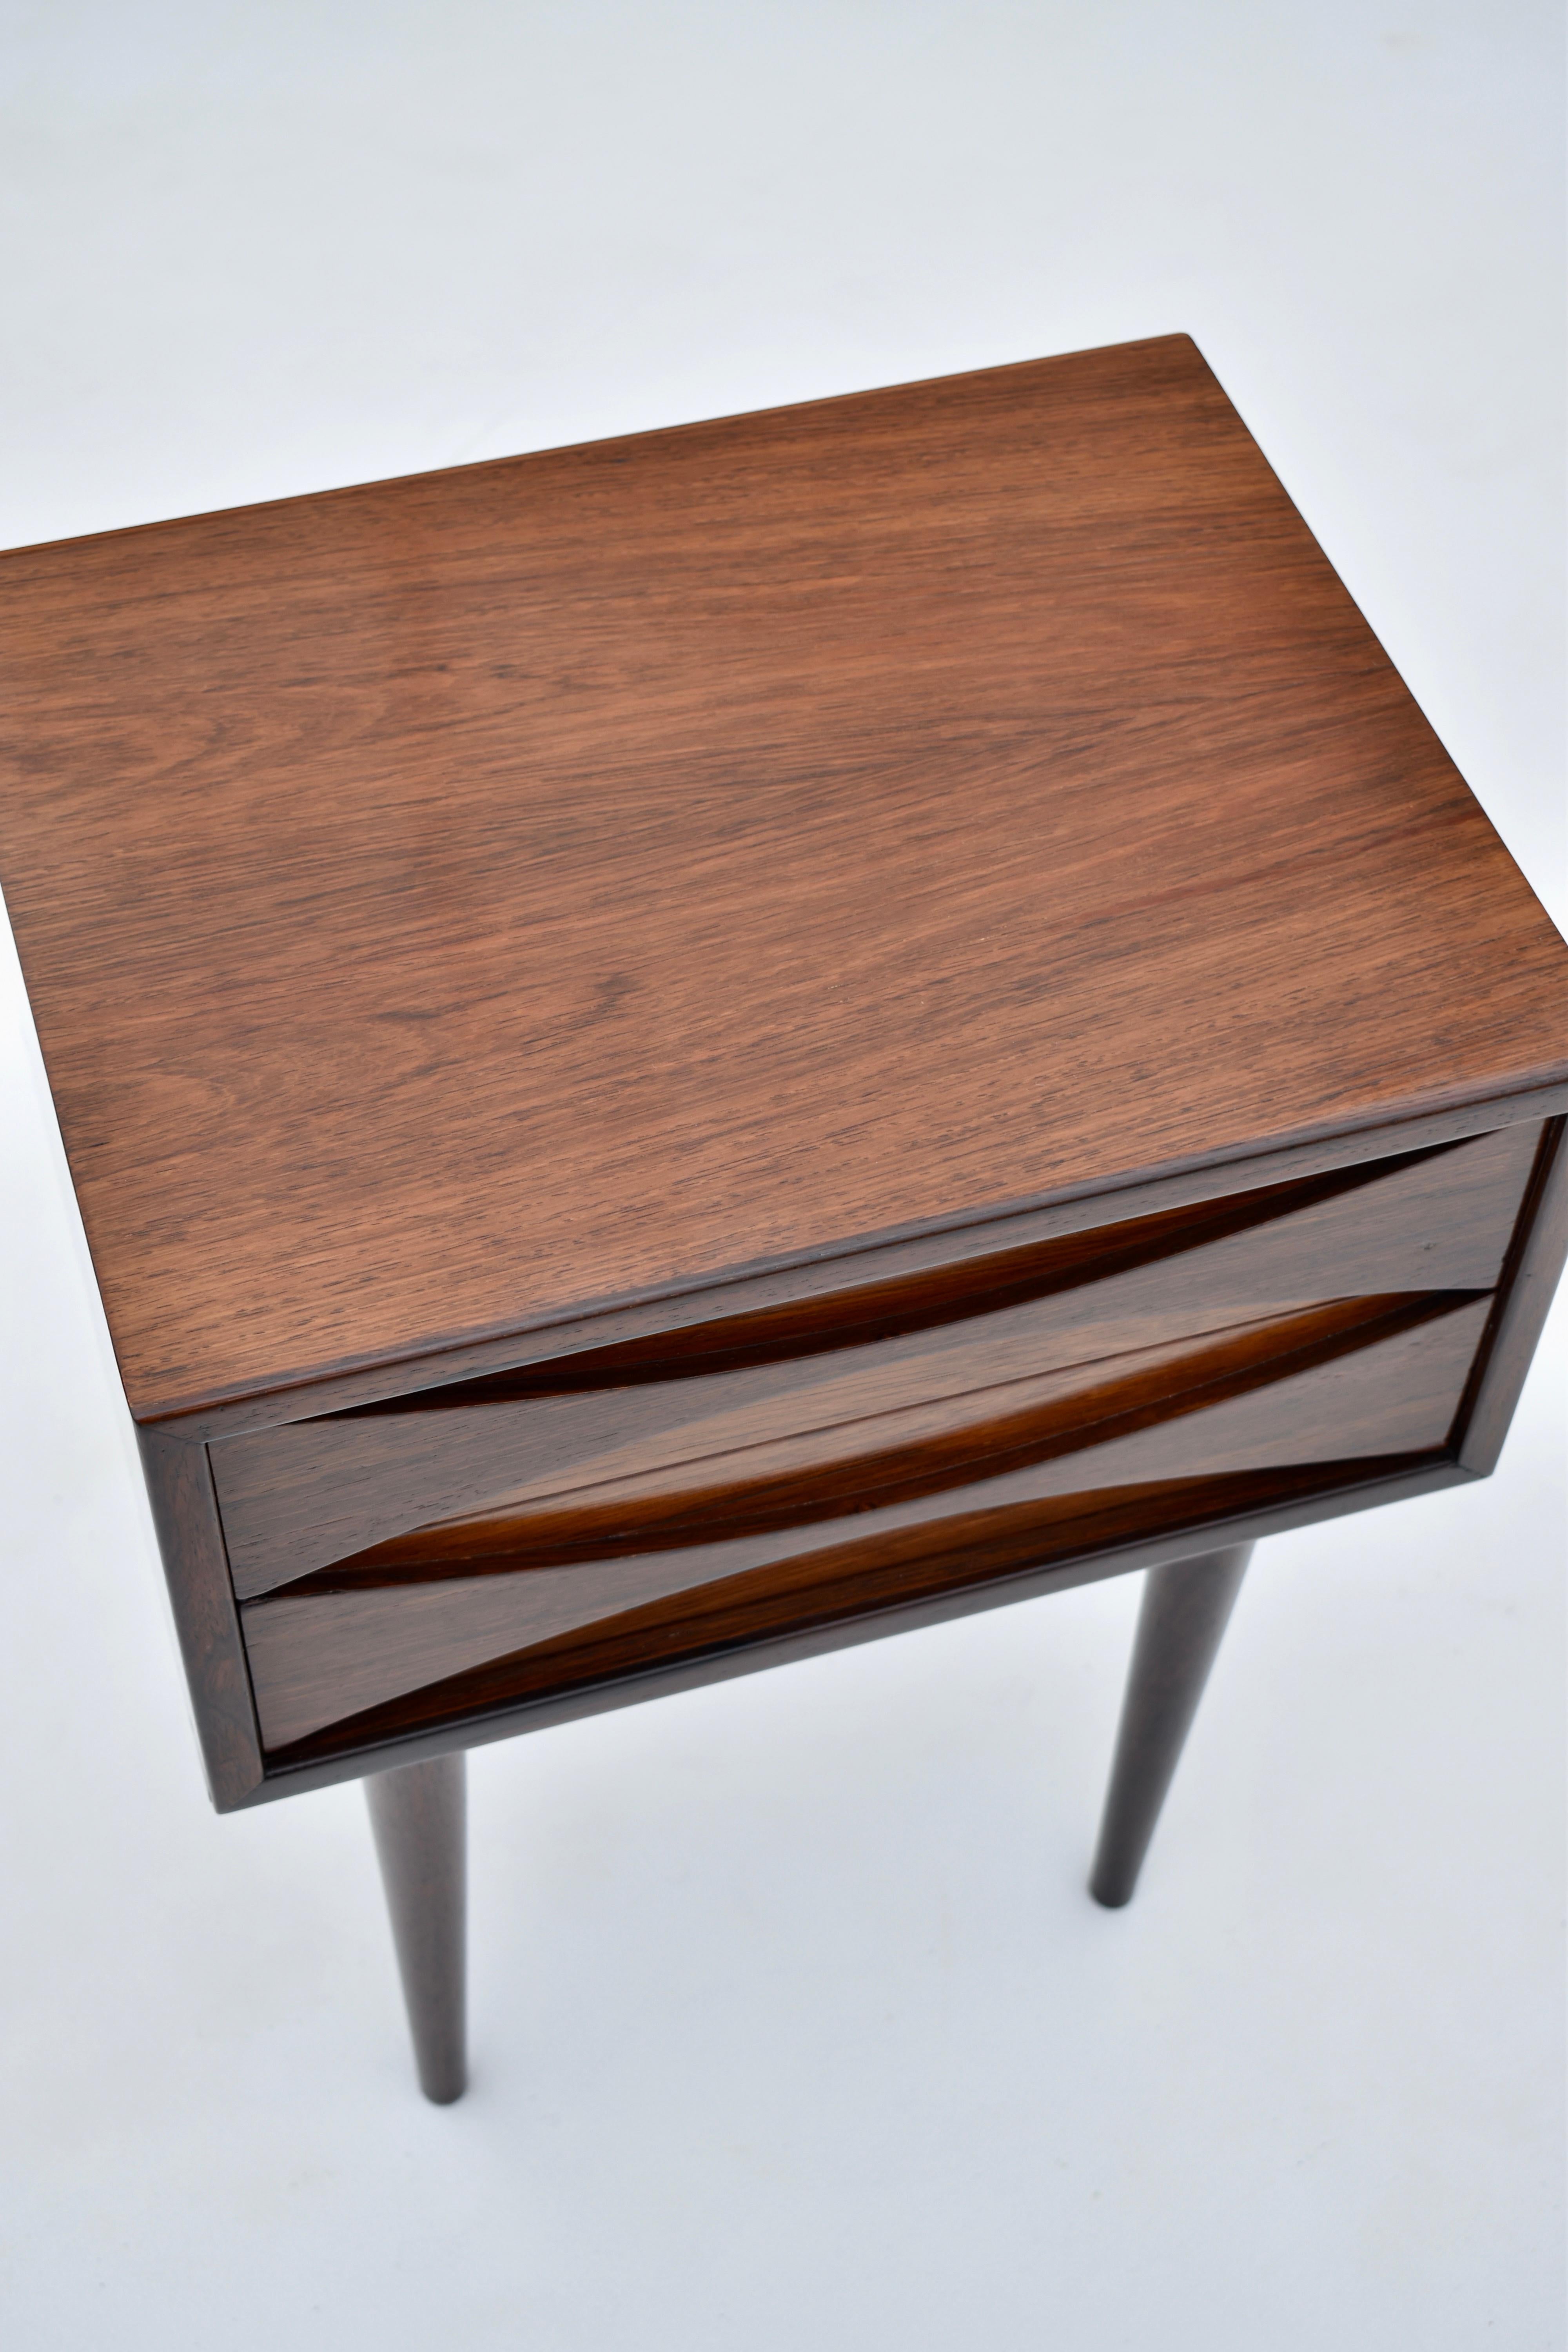 Niels Clausen Rosewood Chest of Drawers for N.C Mobler 1